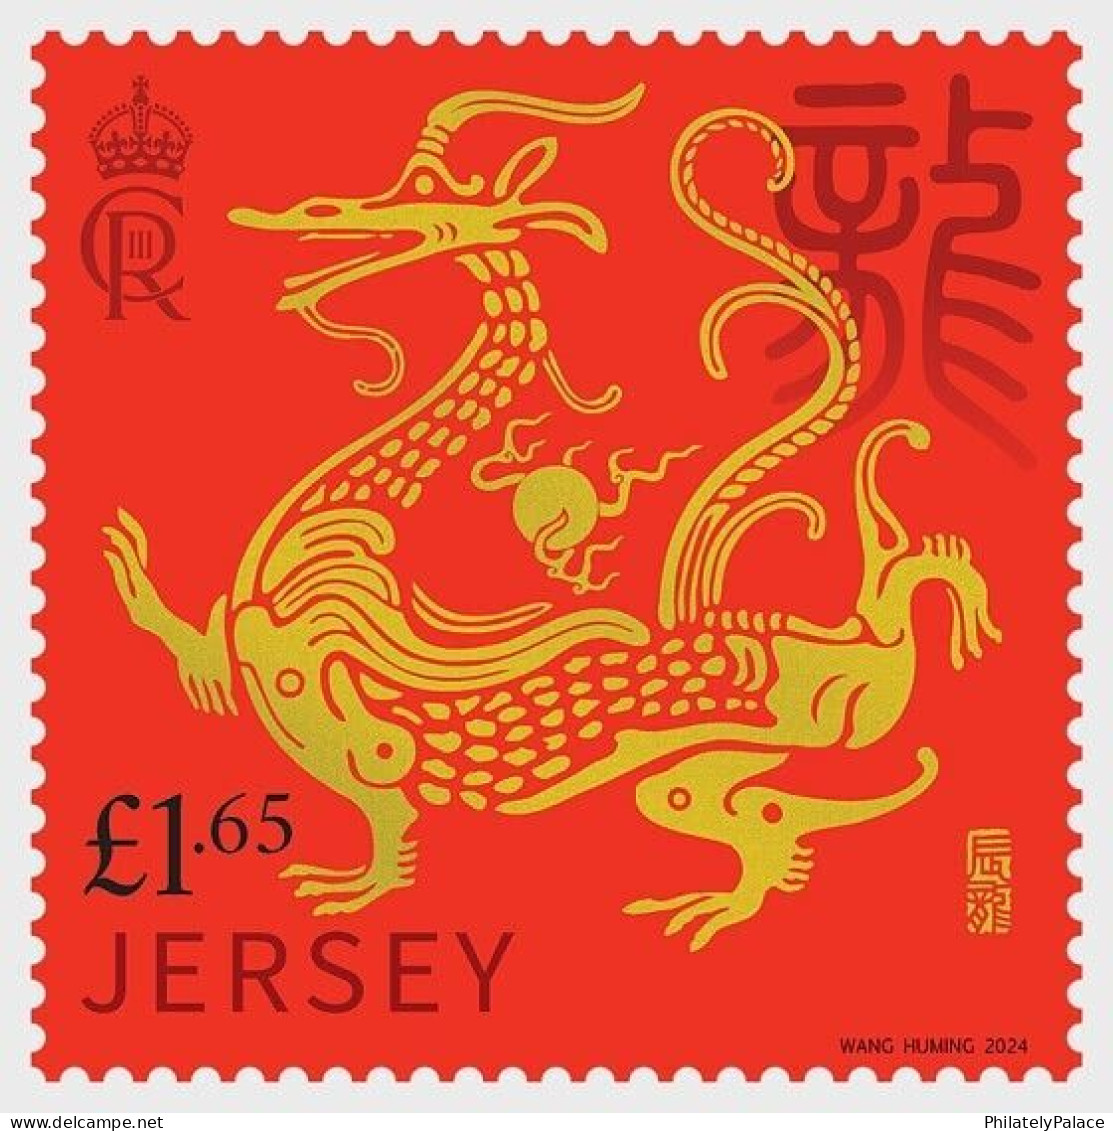 JERSEY 2024 ZODIAC, LUNAR YEAR OF DRAGON, COMP. SET OF 1 STAMP IN MINT MNH (**) - Chinese New Year